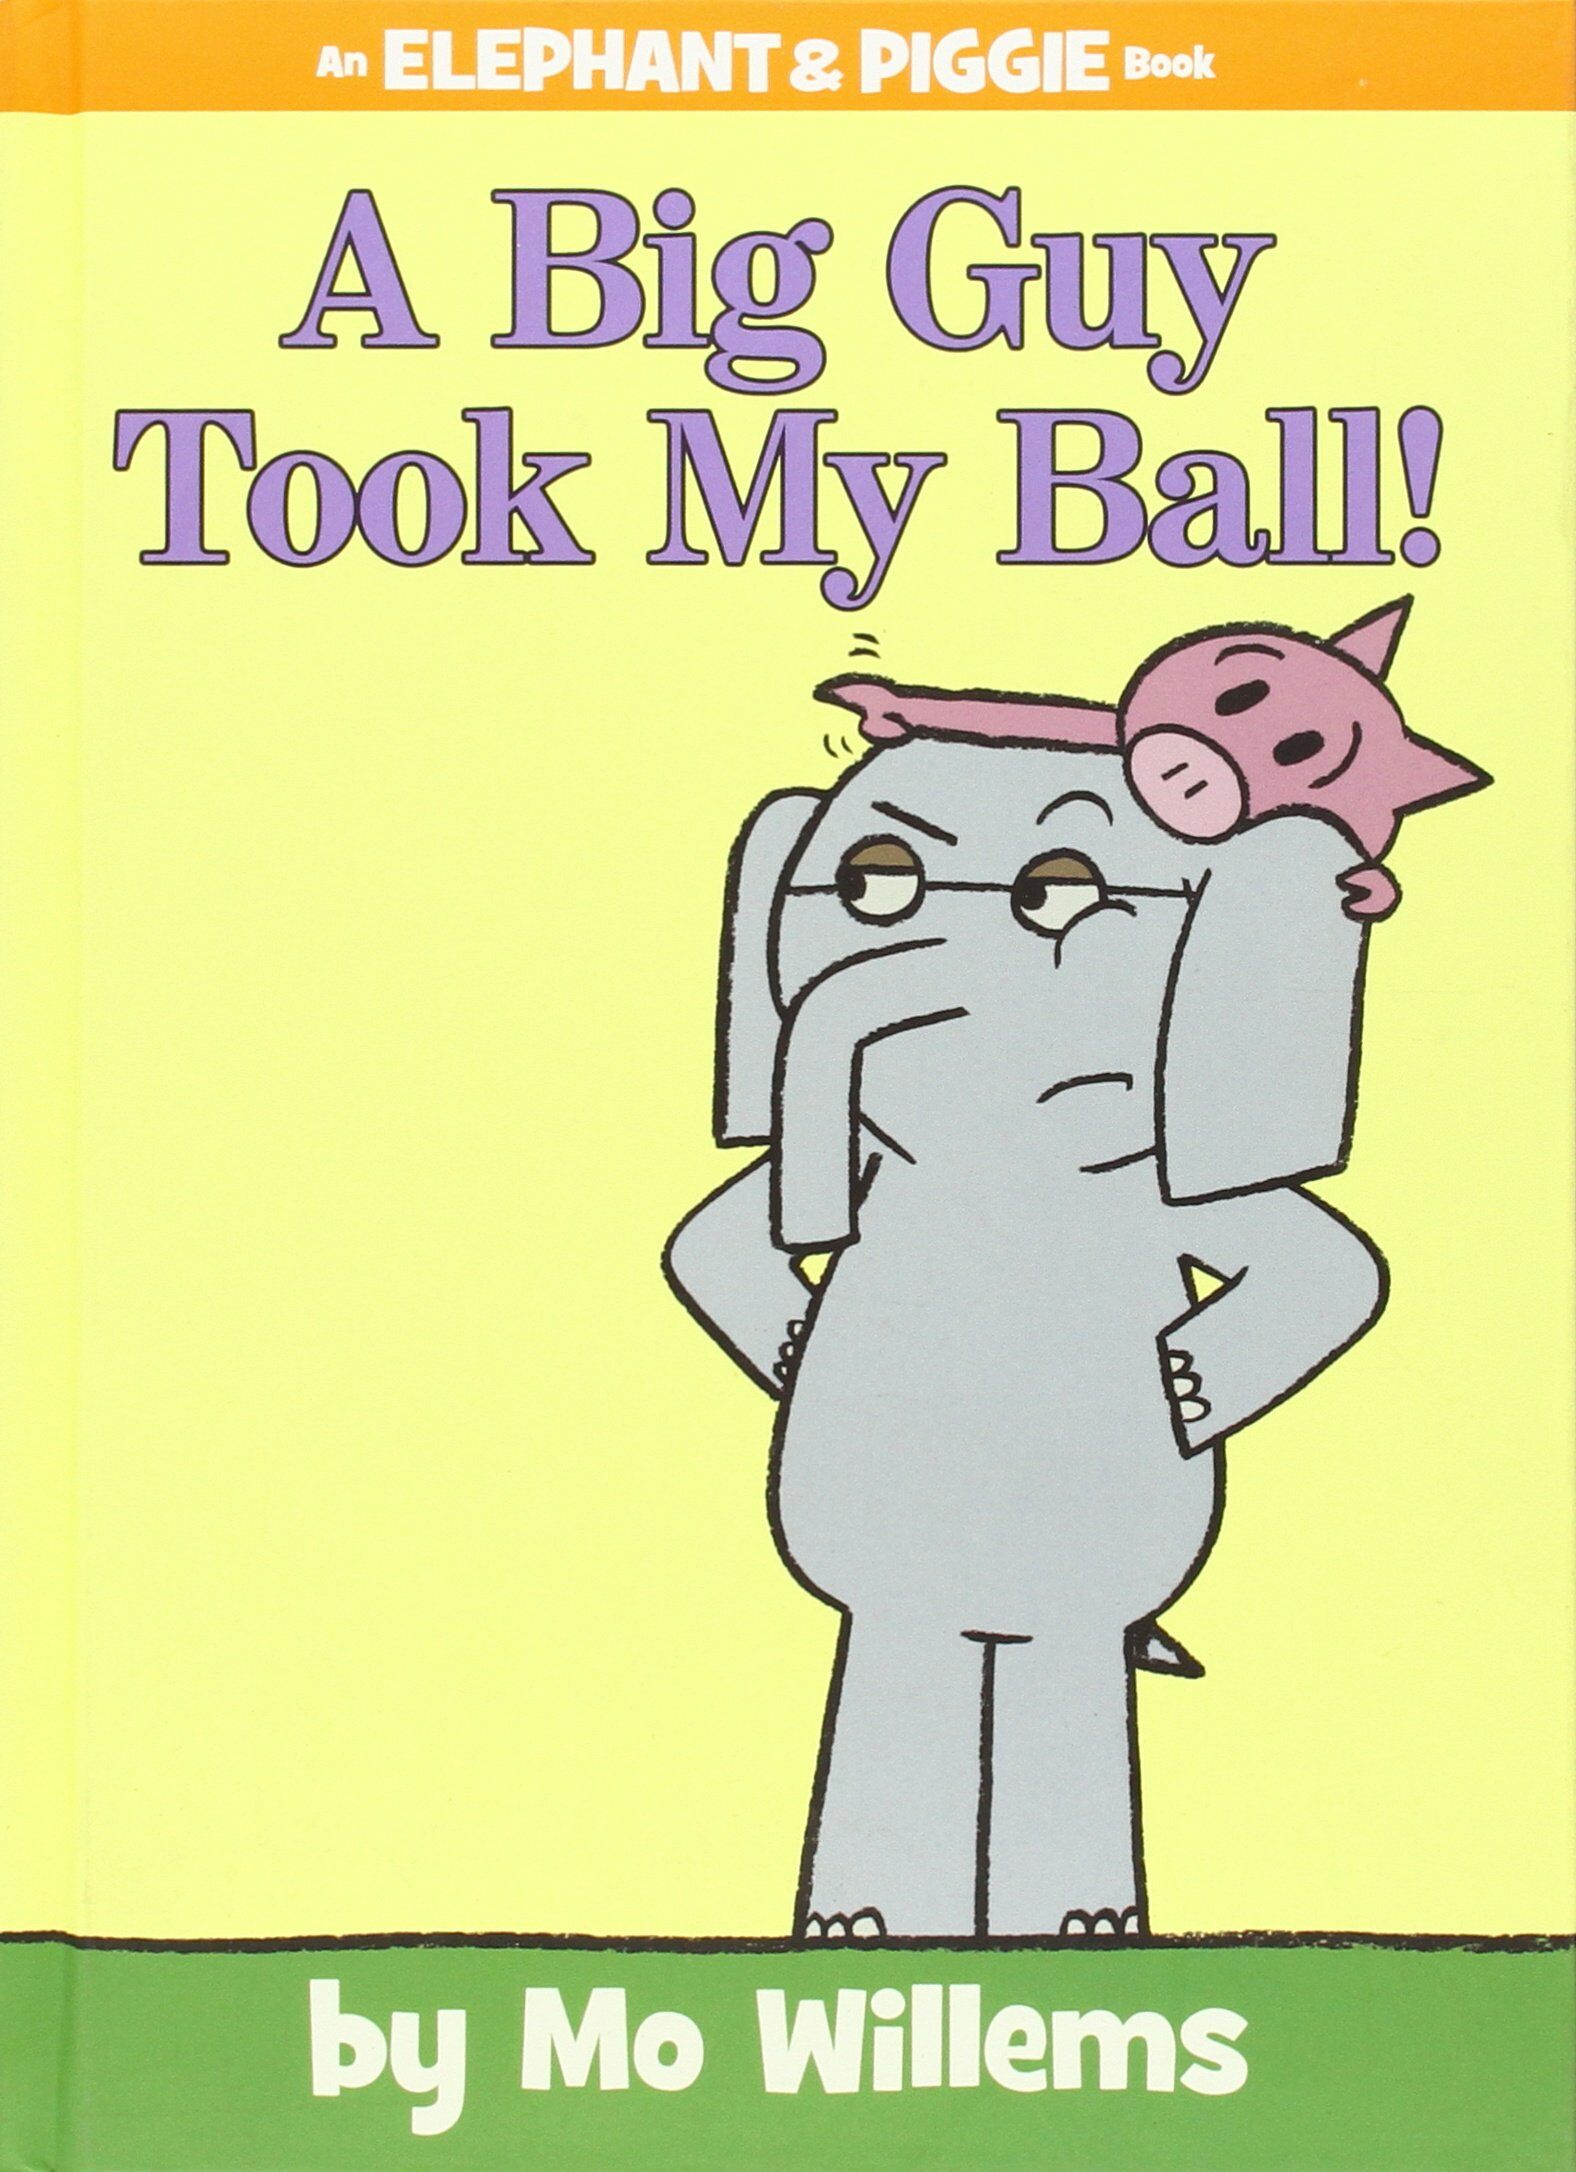 A Big Guy Took My Ball!-An Elephant and Piggie Book (Hardcover)